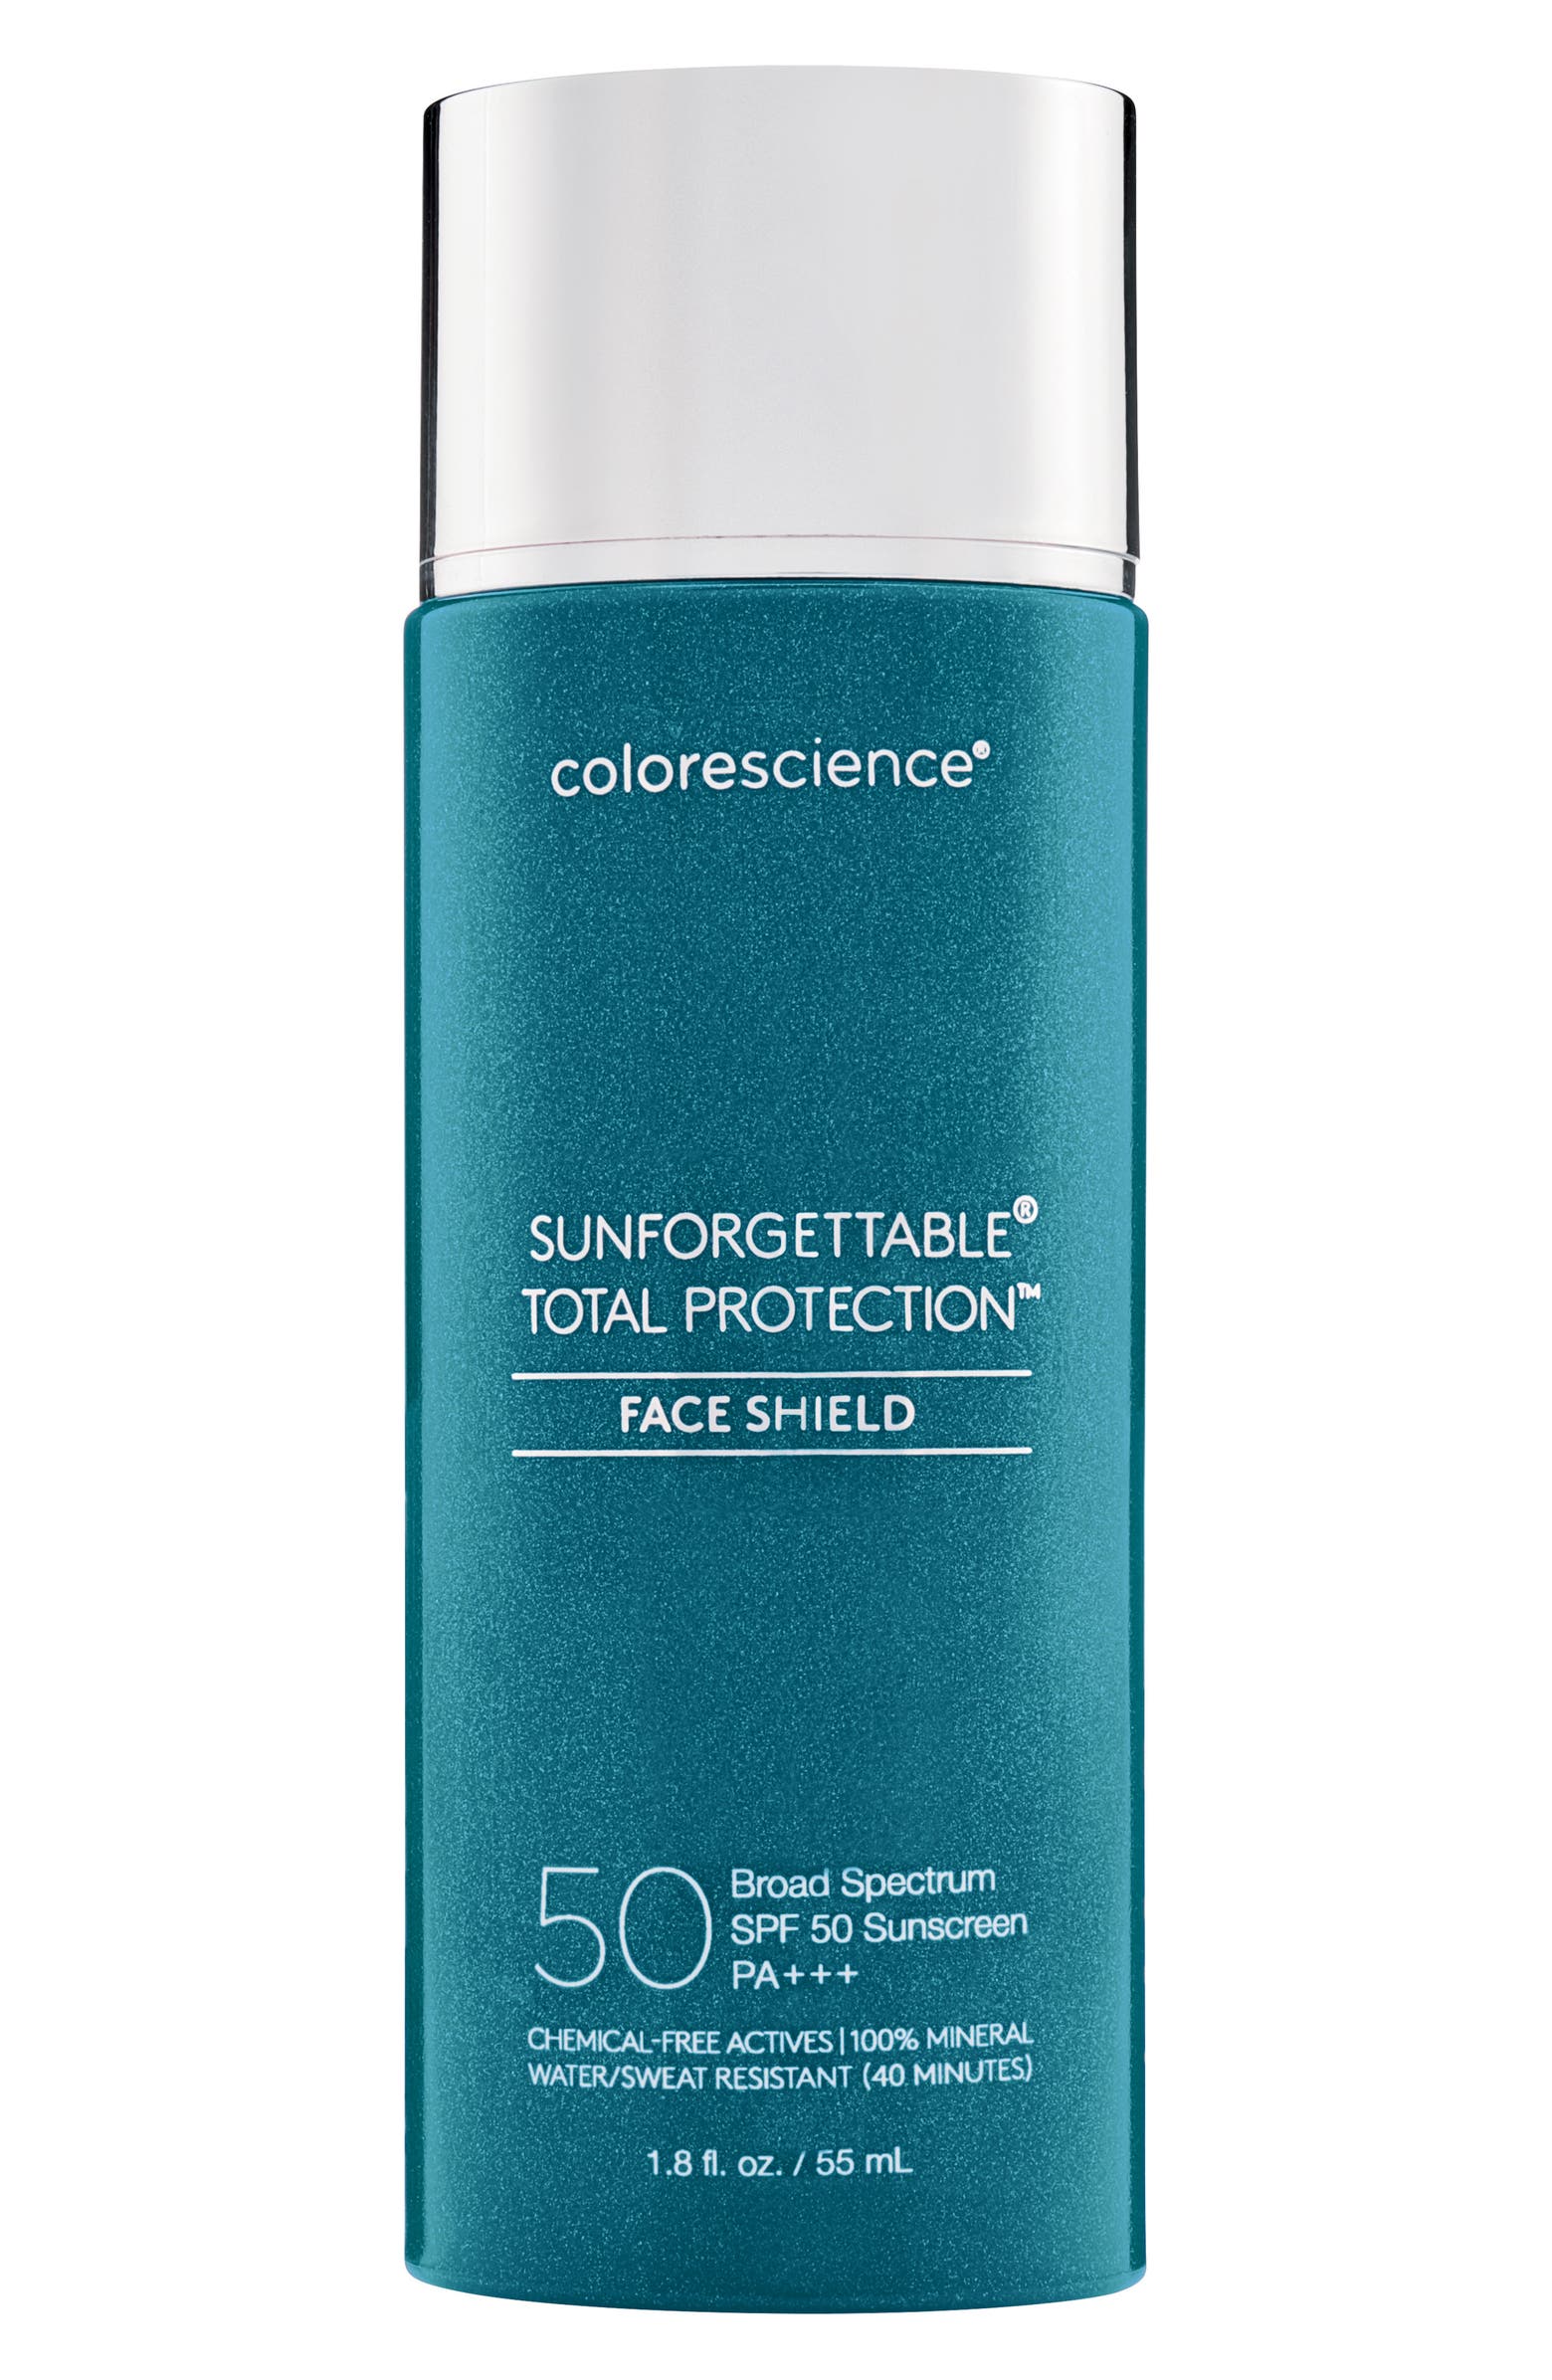 nordstrom.com | Sunforgettable Total Protection Face Shield SPF 50 Sunscreen